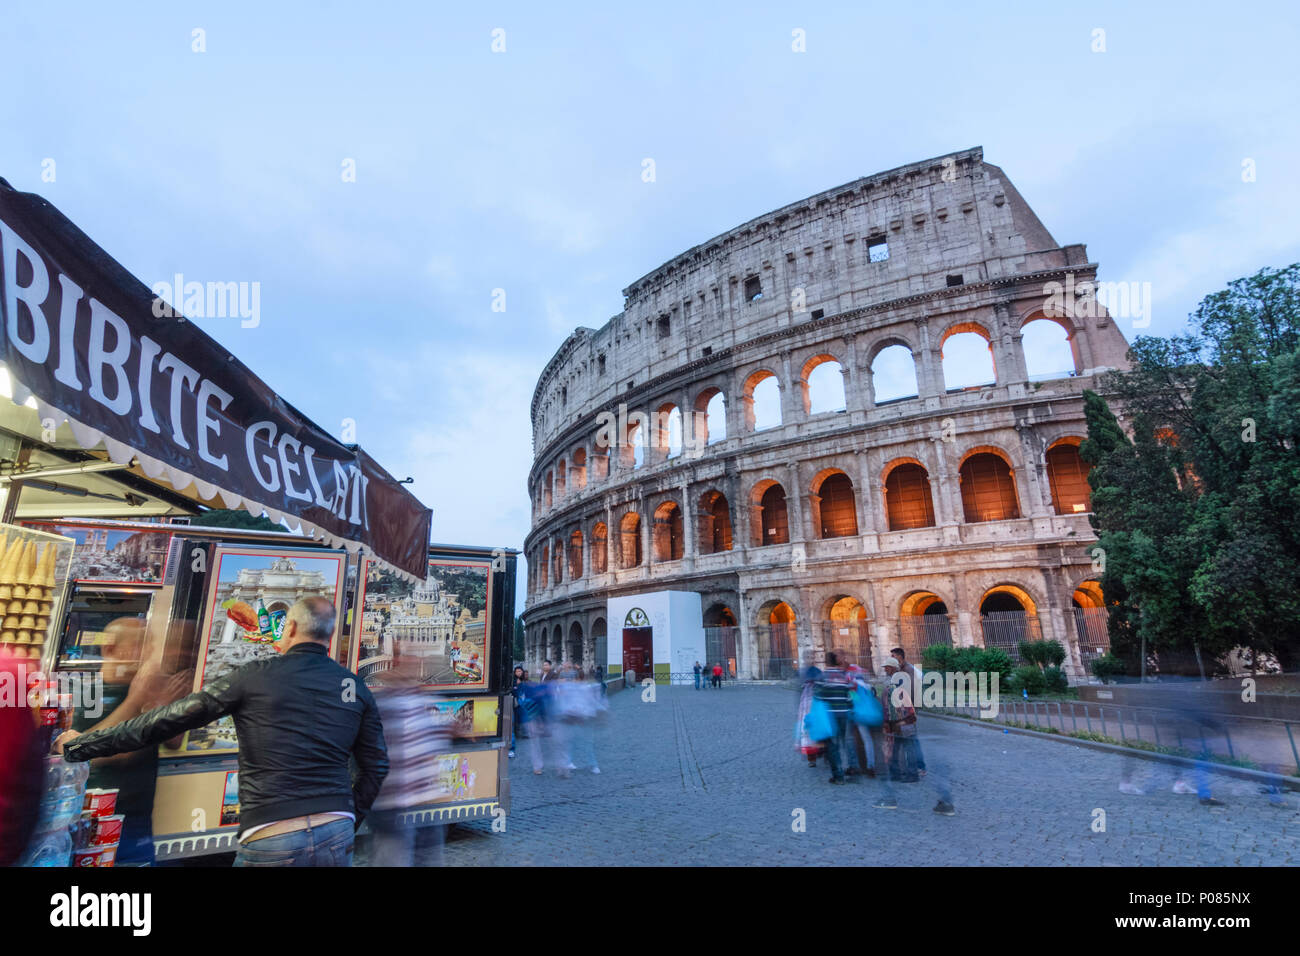 Snack wagon next to the Coliseum at dusk. Rome, Italy Stock Photo